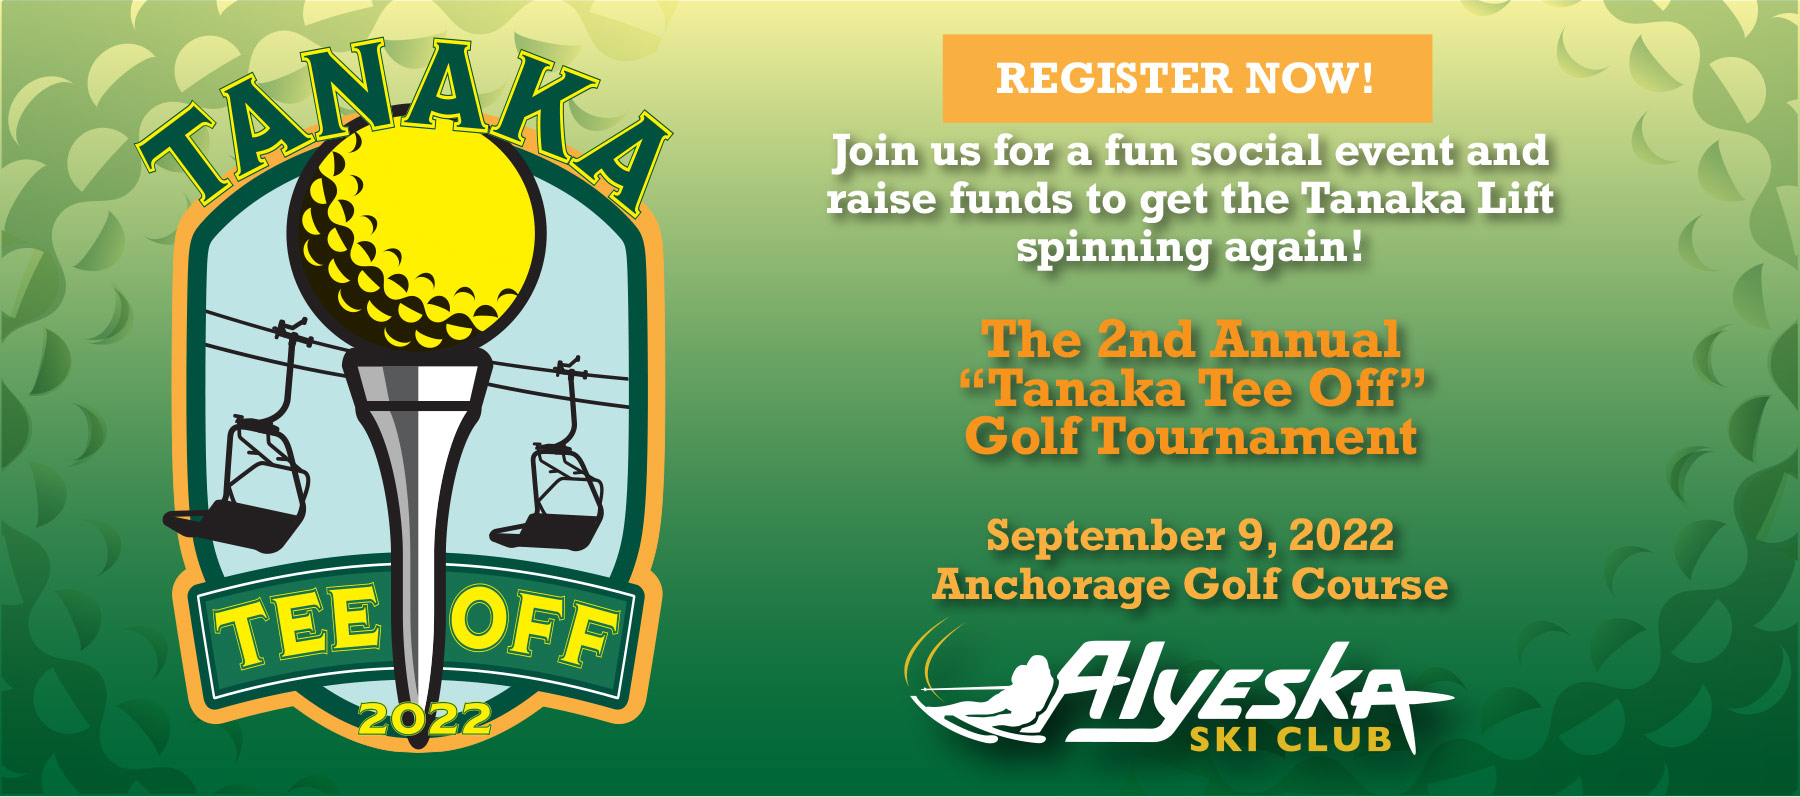 Tanaka Tee Off logo and registration button